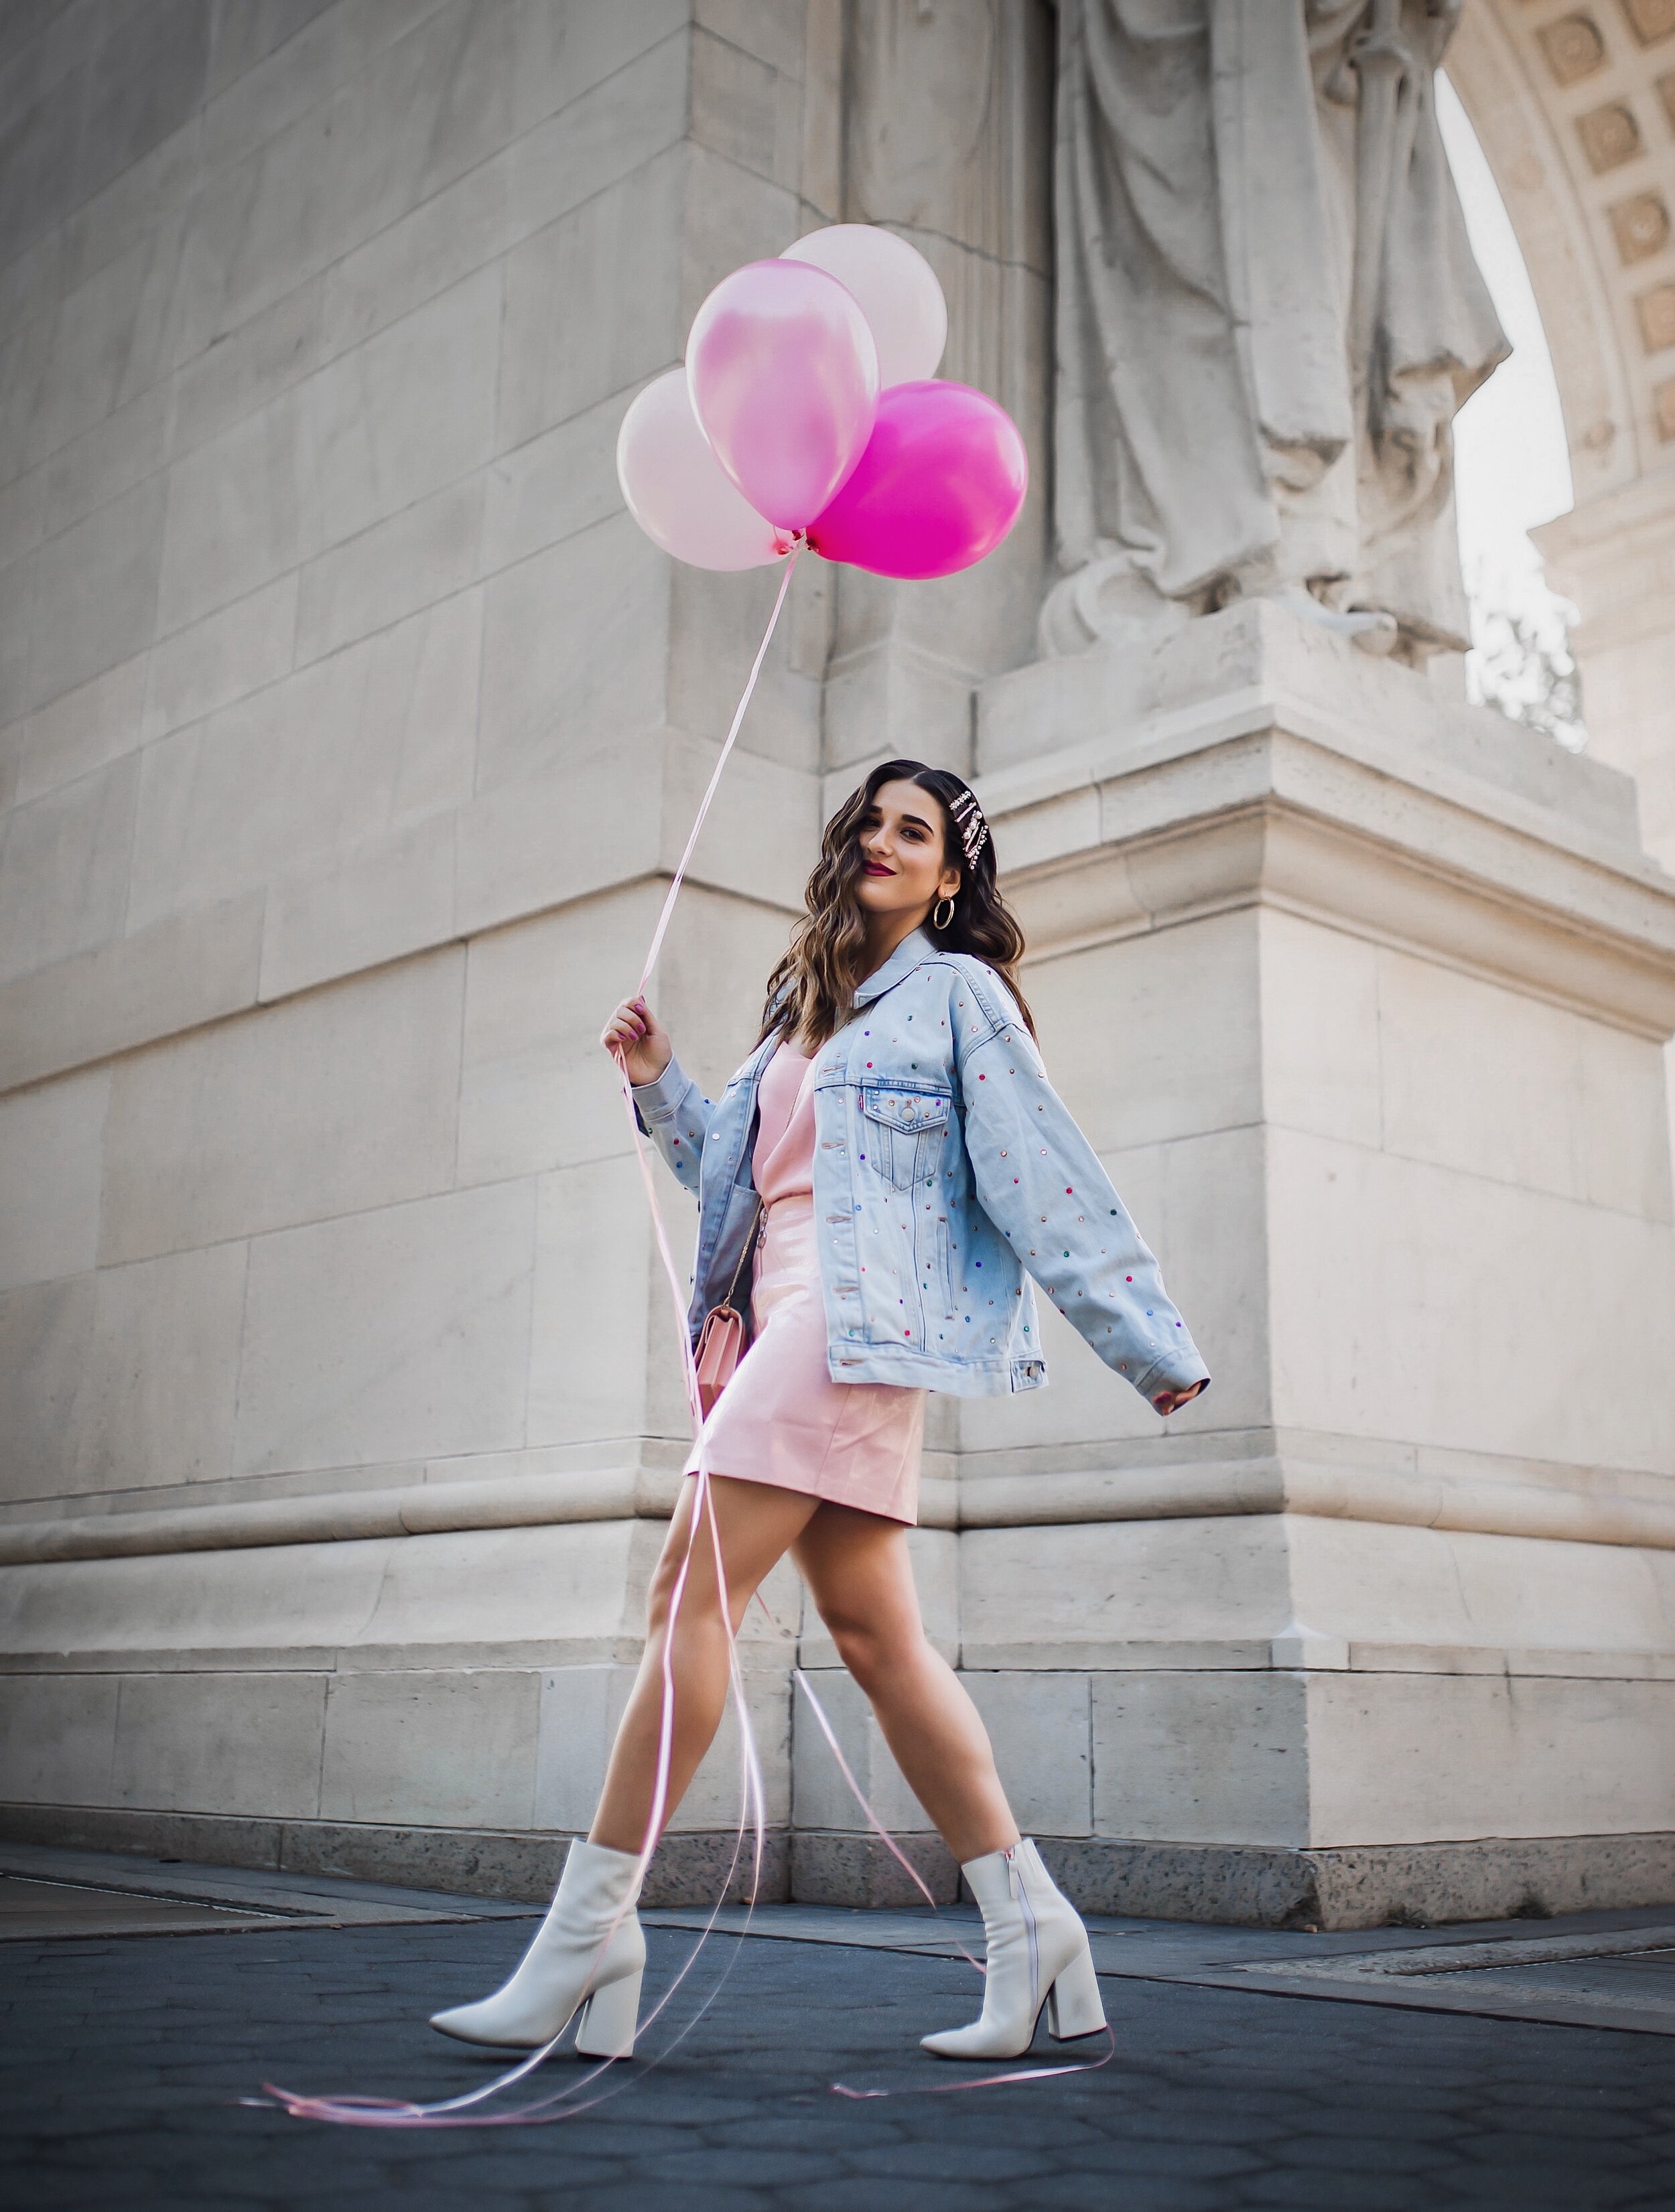 The Final Year Of My 20's Happy 29th Birthday Esther Santer NYC Street Style Blogger White Booties Trend Jeweled Jean Jacket Levis Denim Pink Balooons Leather Skirt Hair Clips Accessories Pastel Blue Shoes New Yoek City Inspo Shoot Washington Square.JPG